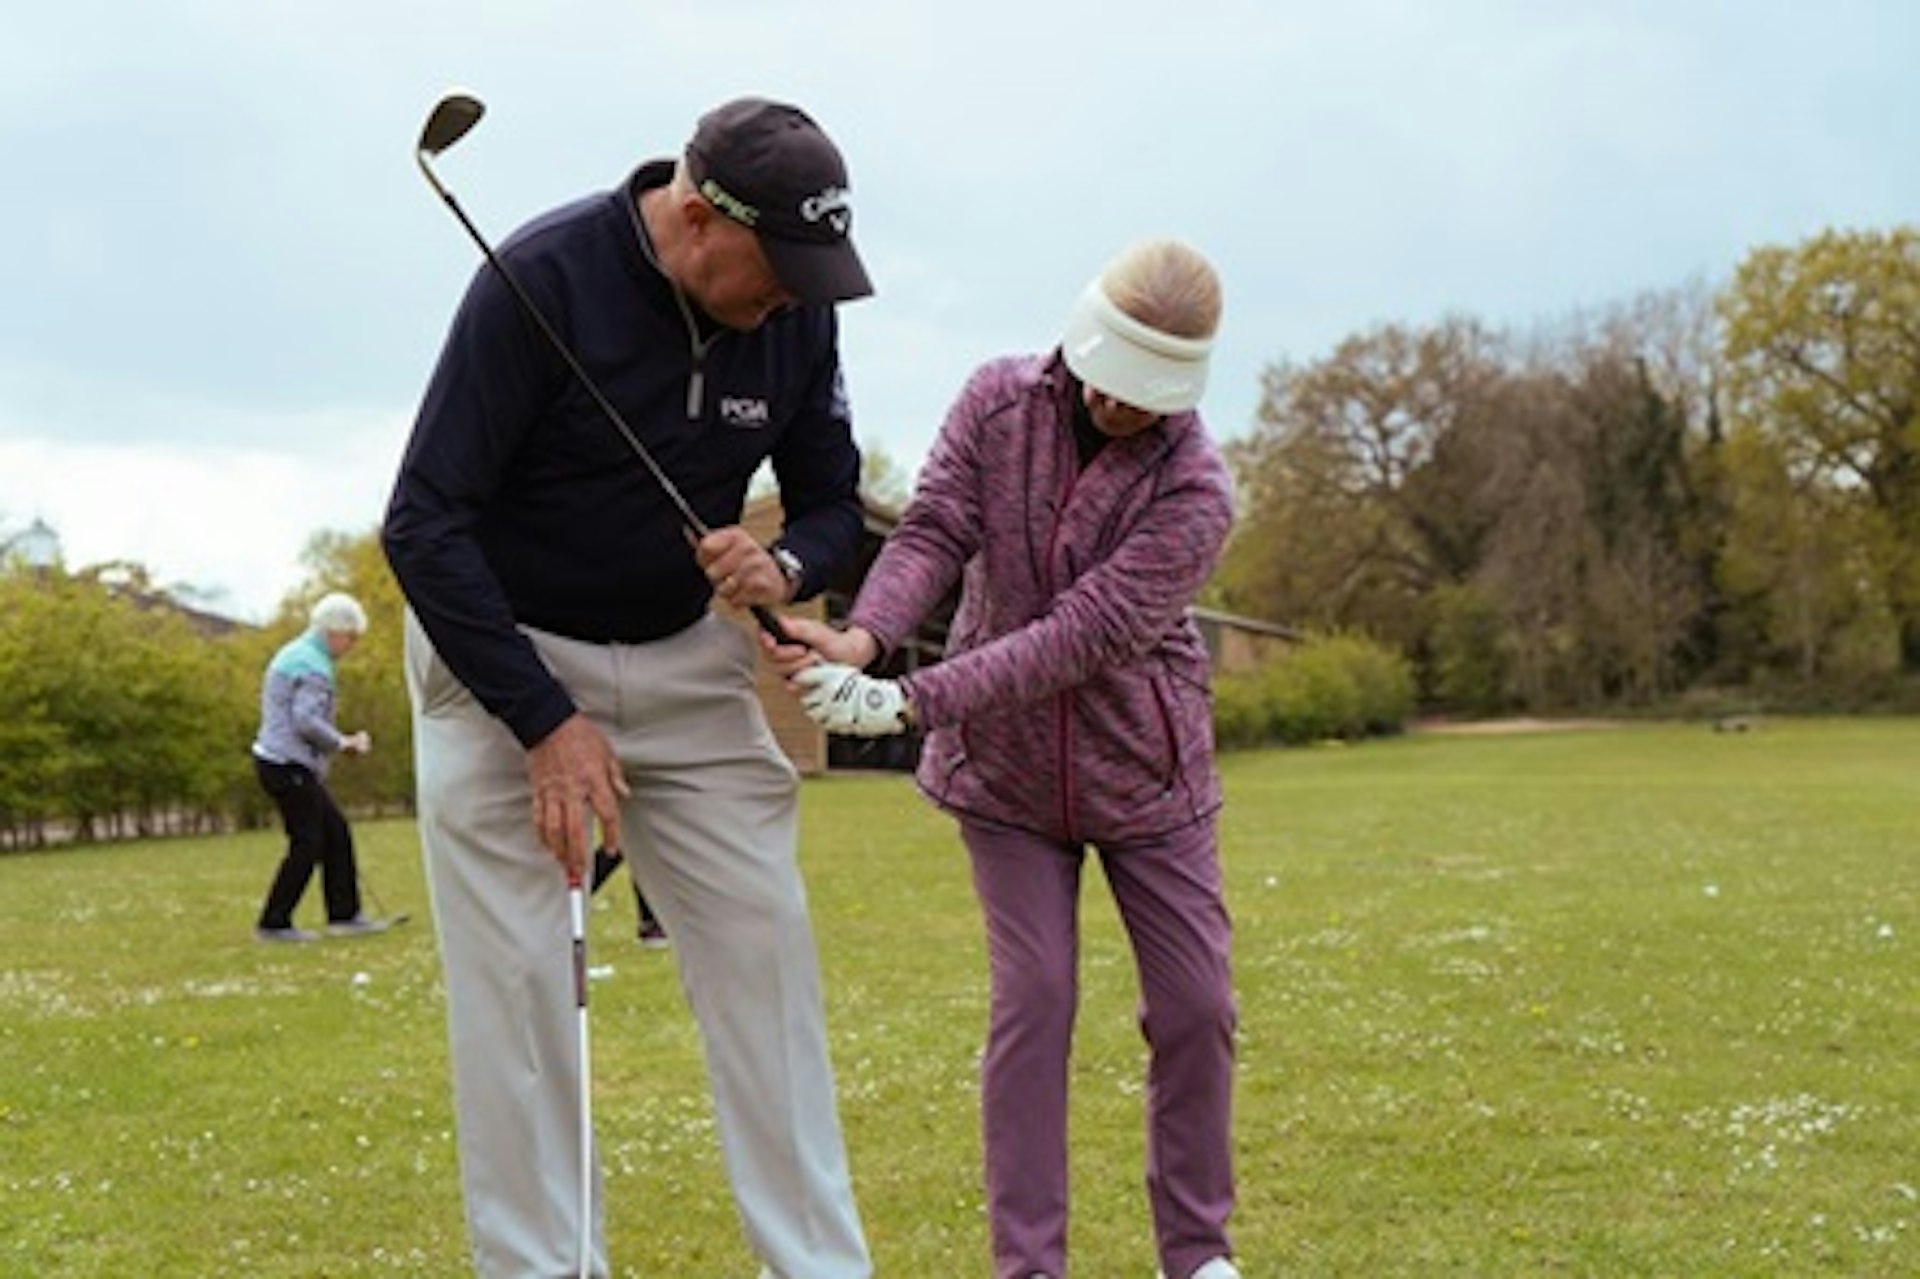 30 minute Golf Lesson with a PGA Professional 2